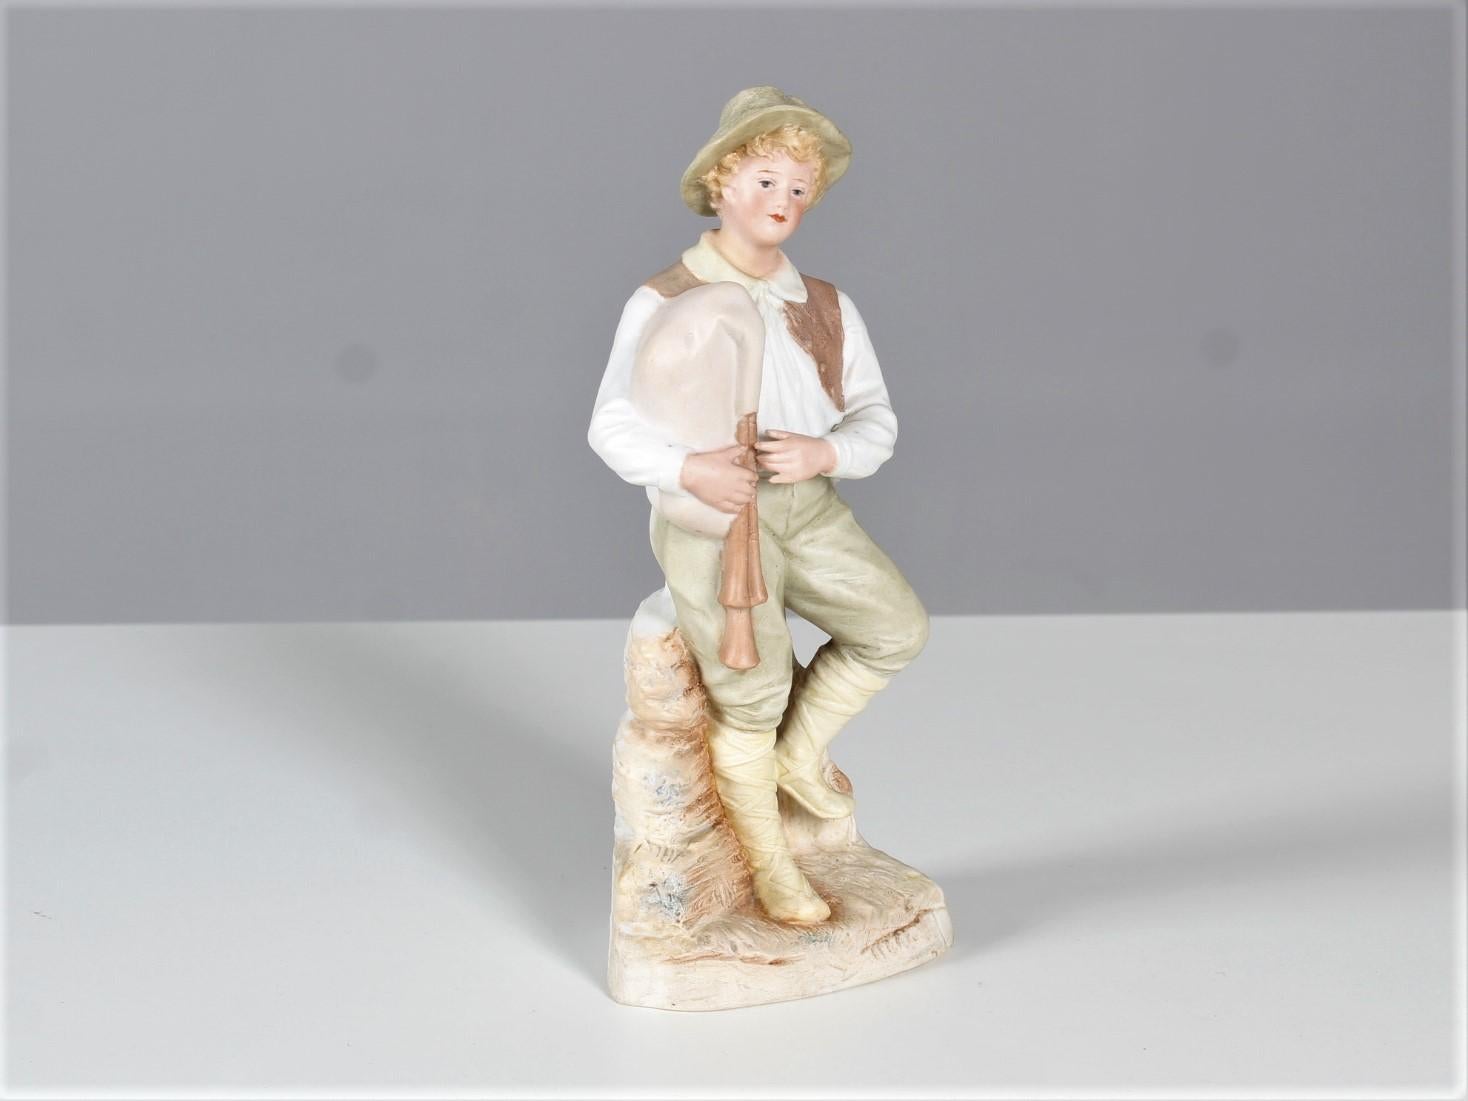 Antique porcelain sculpture by Heubach brothers from Lichte, in Thüringen Germany.
Depicted is a boy with a bagpipe sitting on a rock.
The stamp of the porcelain manufactory 